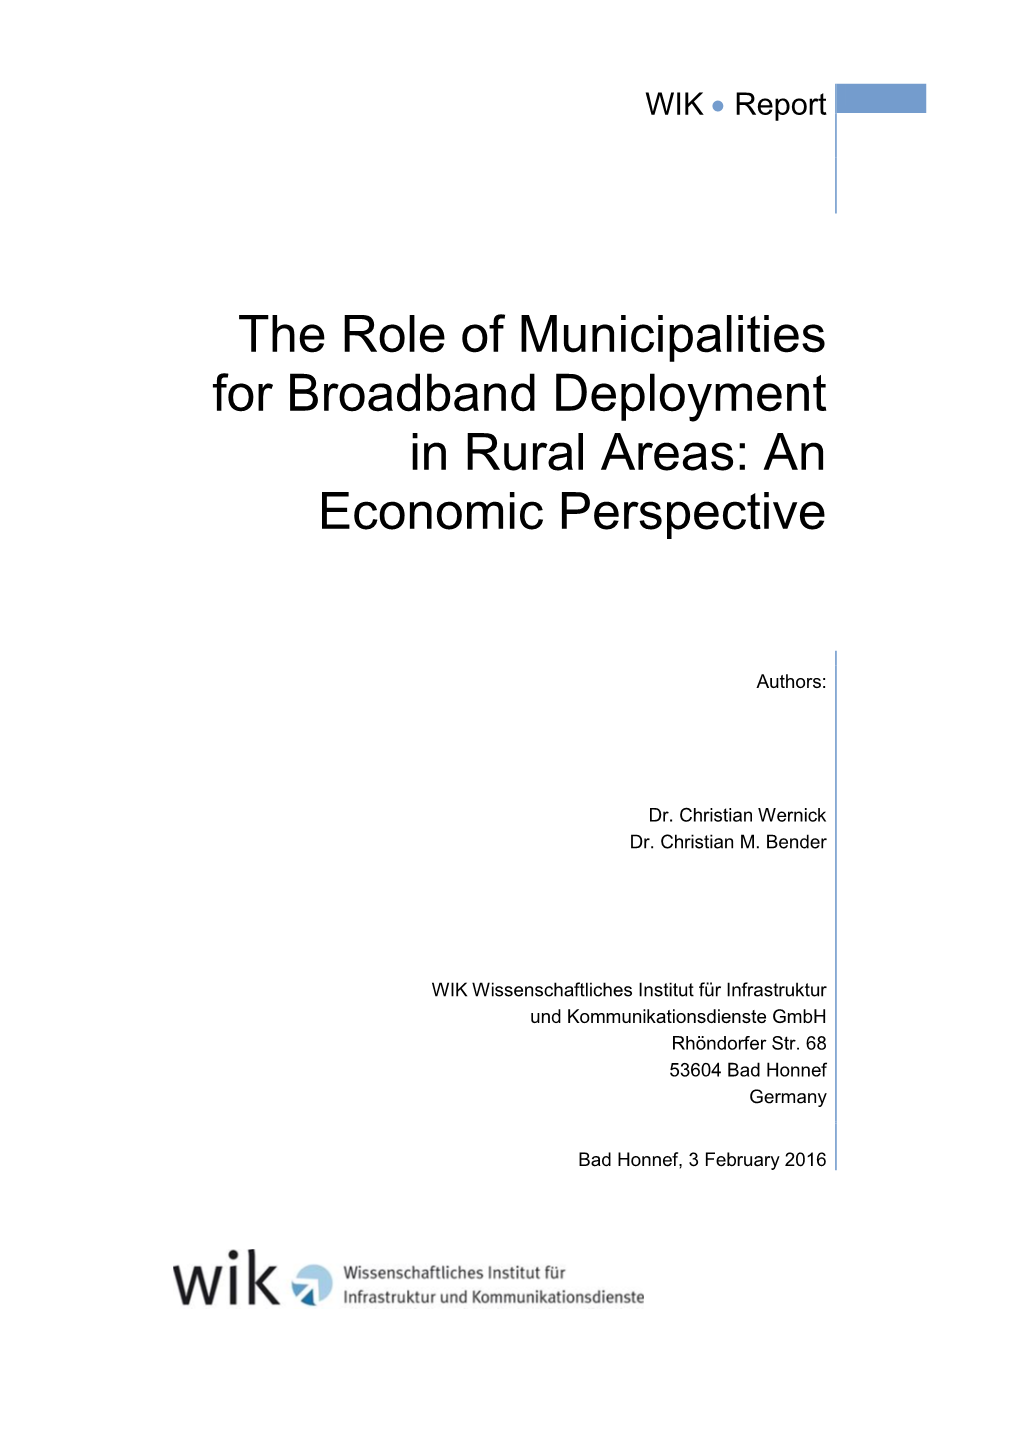 The Role of Municipalities for Broadband Deployment in Rural Areas: an Economic Perspective